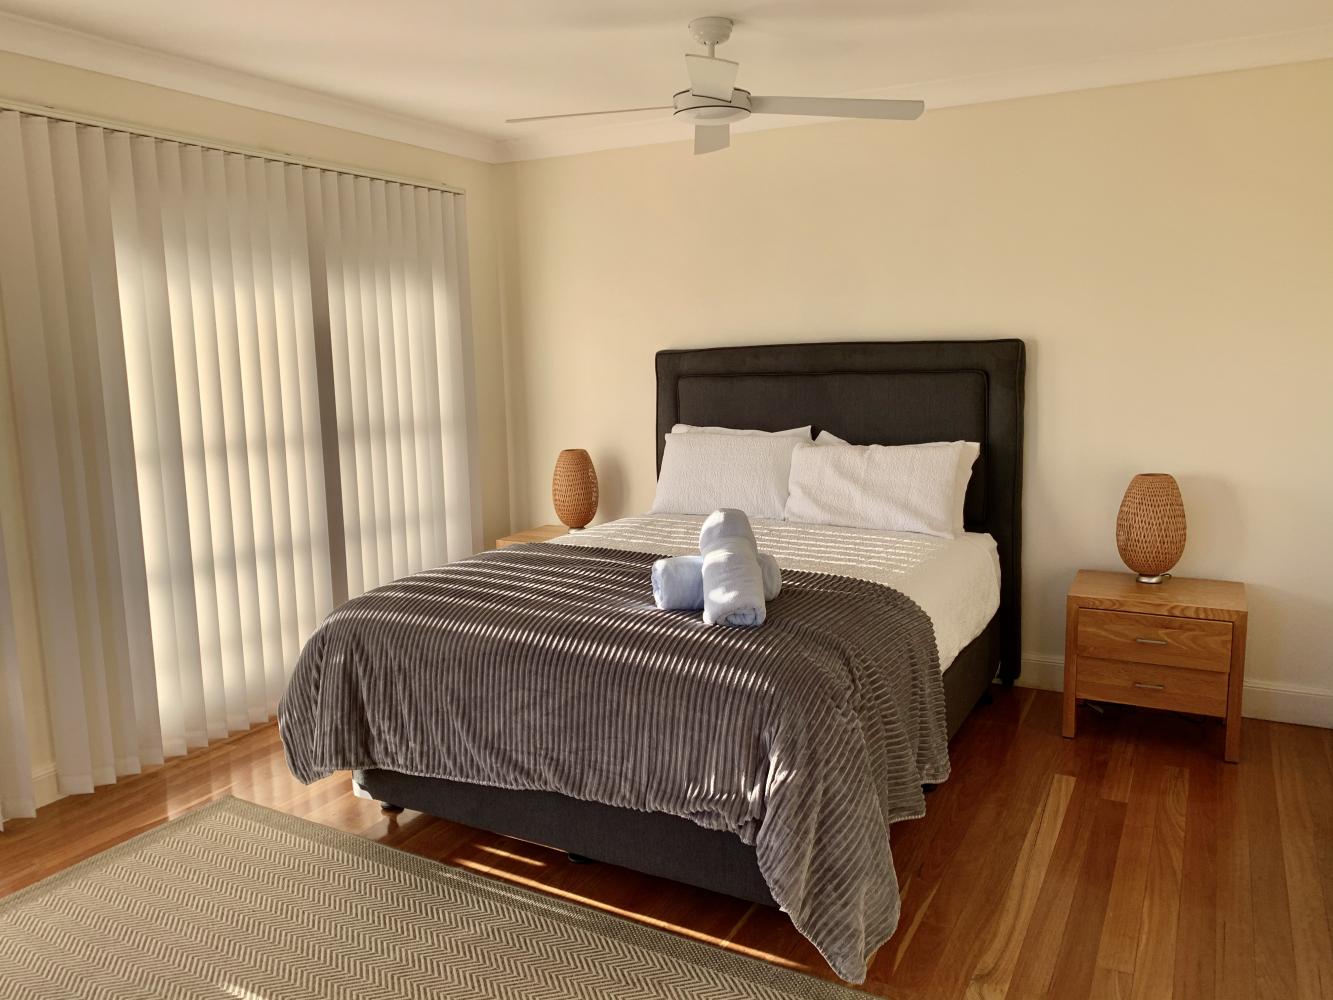 Main bedroom with private balcony, ensuite and walk in wardrobe. Illalangi